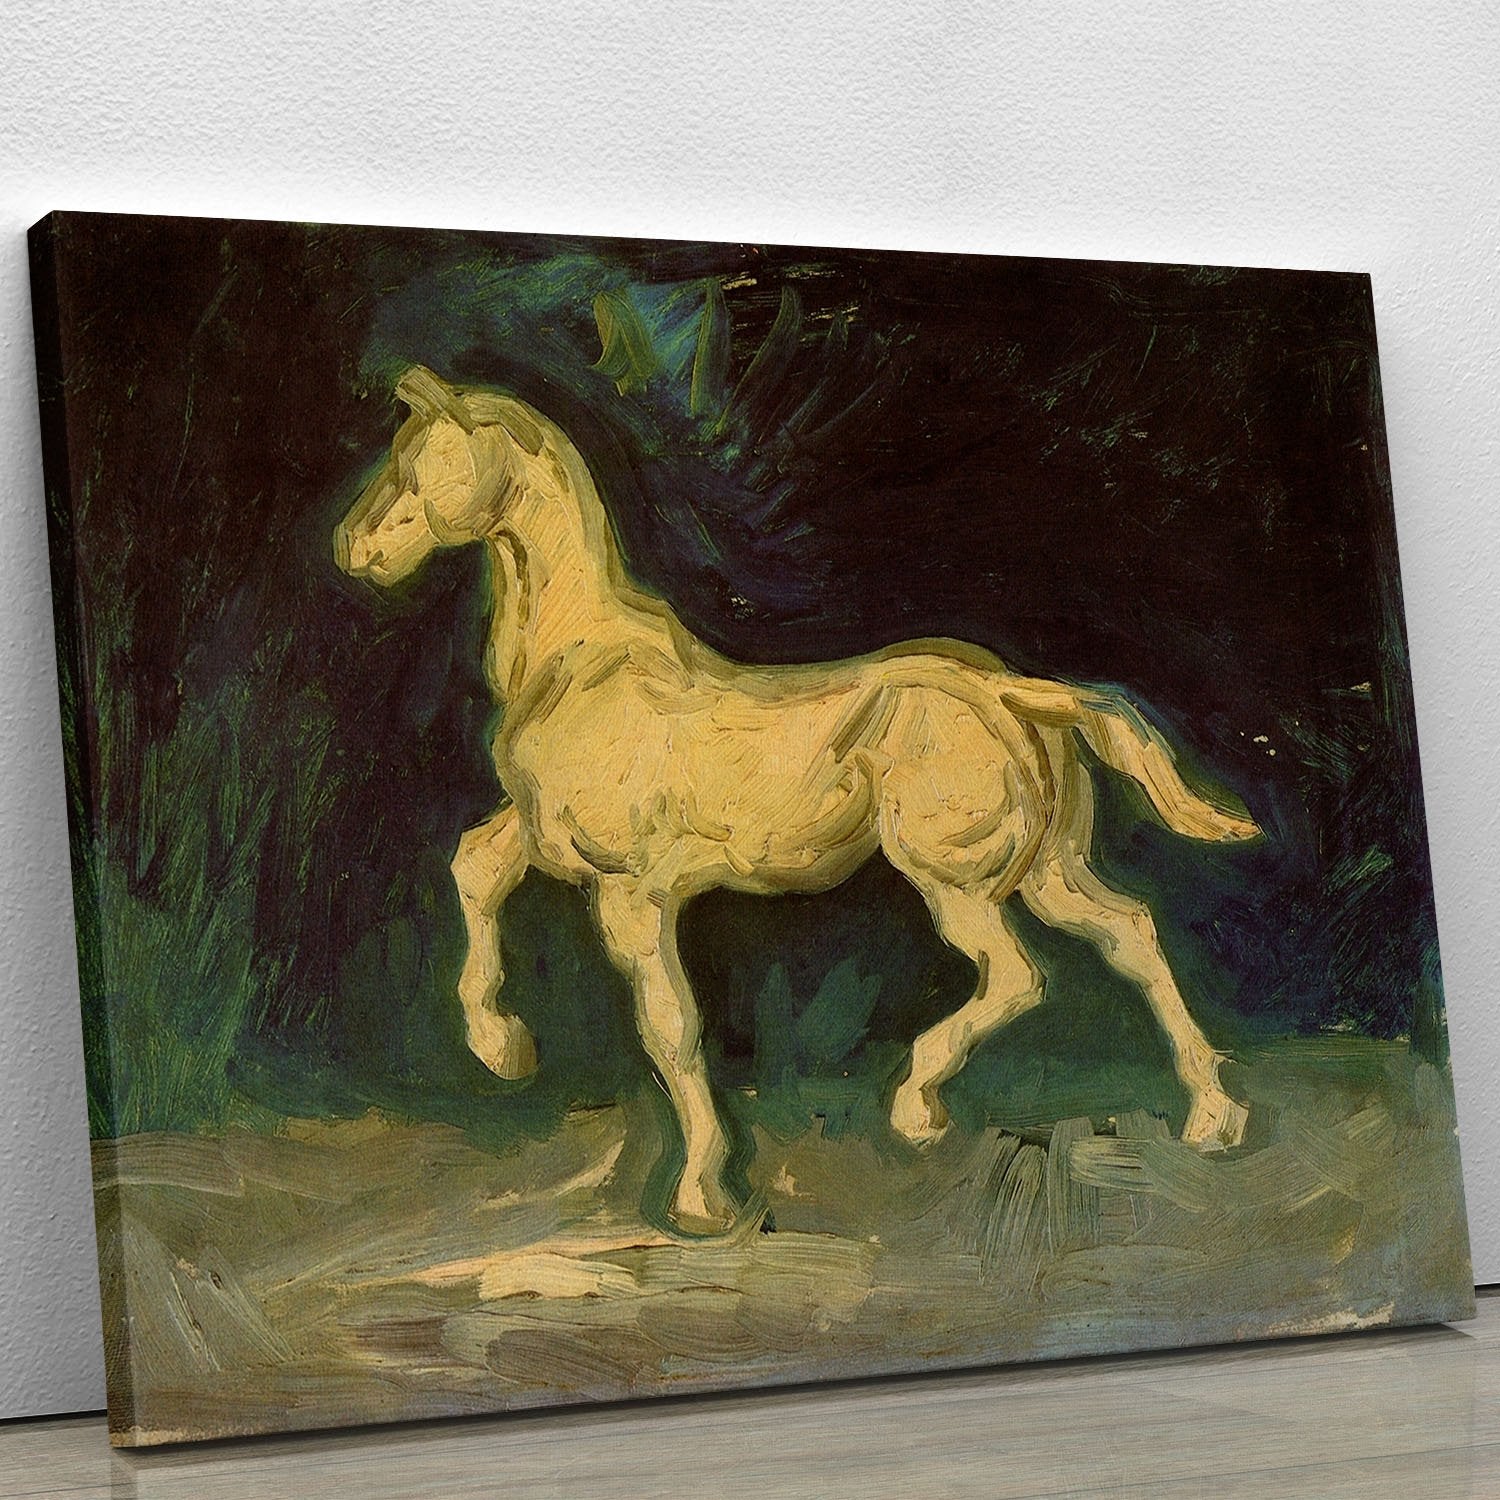 Plaster Statuette of a Horse by Van Gogh Canvas Print or Poster